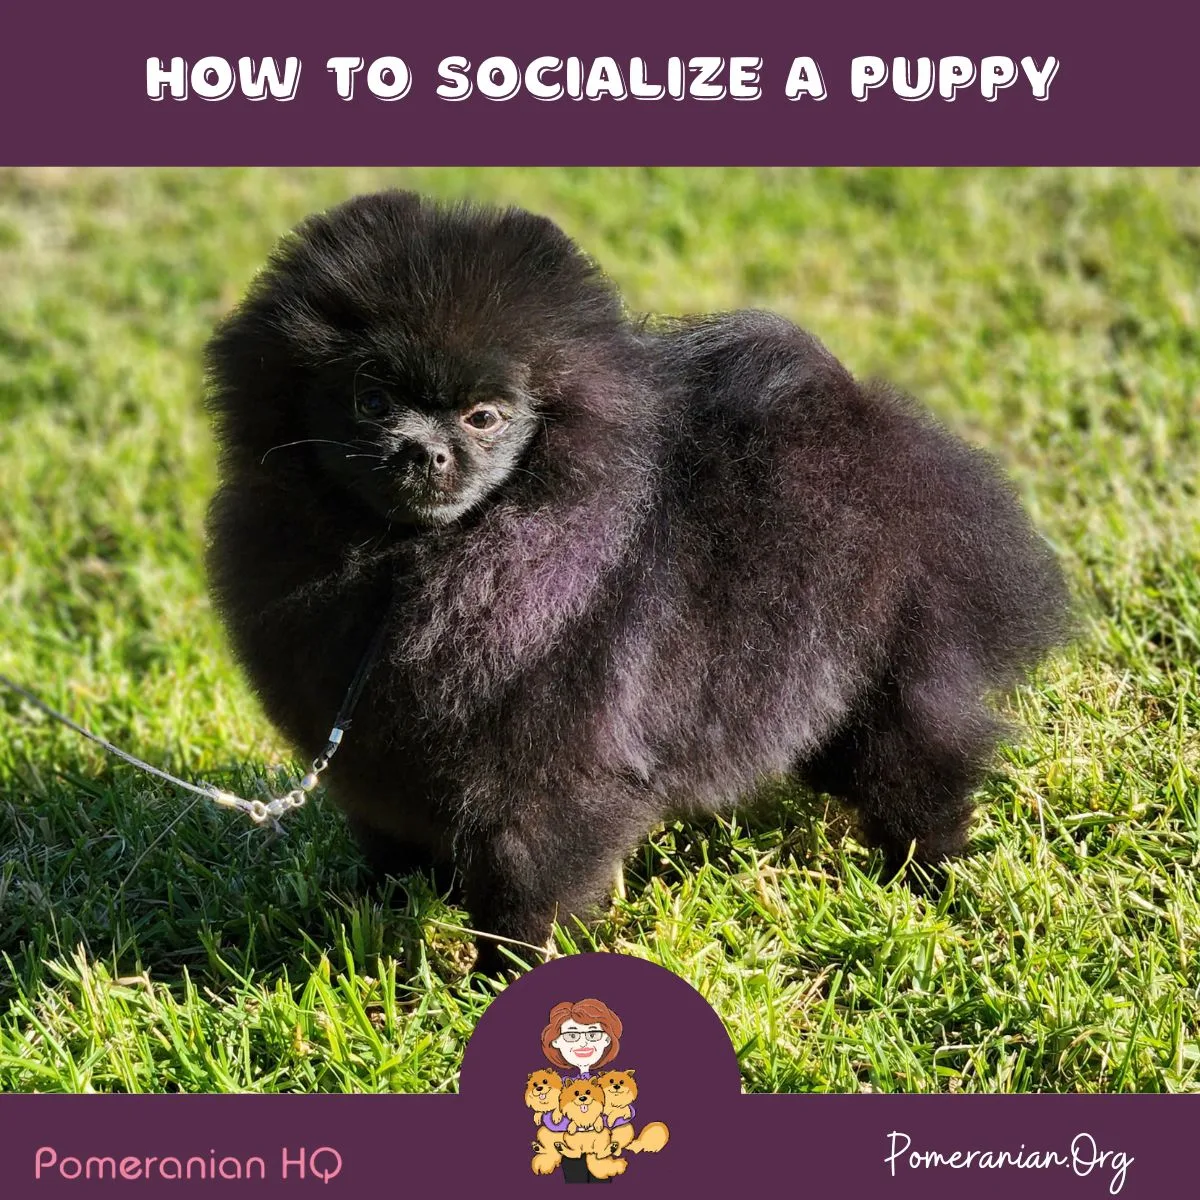 How to Socialize a Puppy